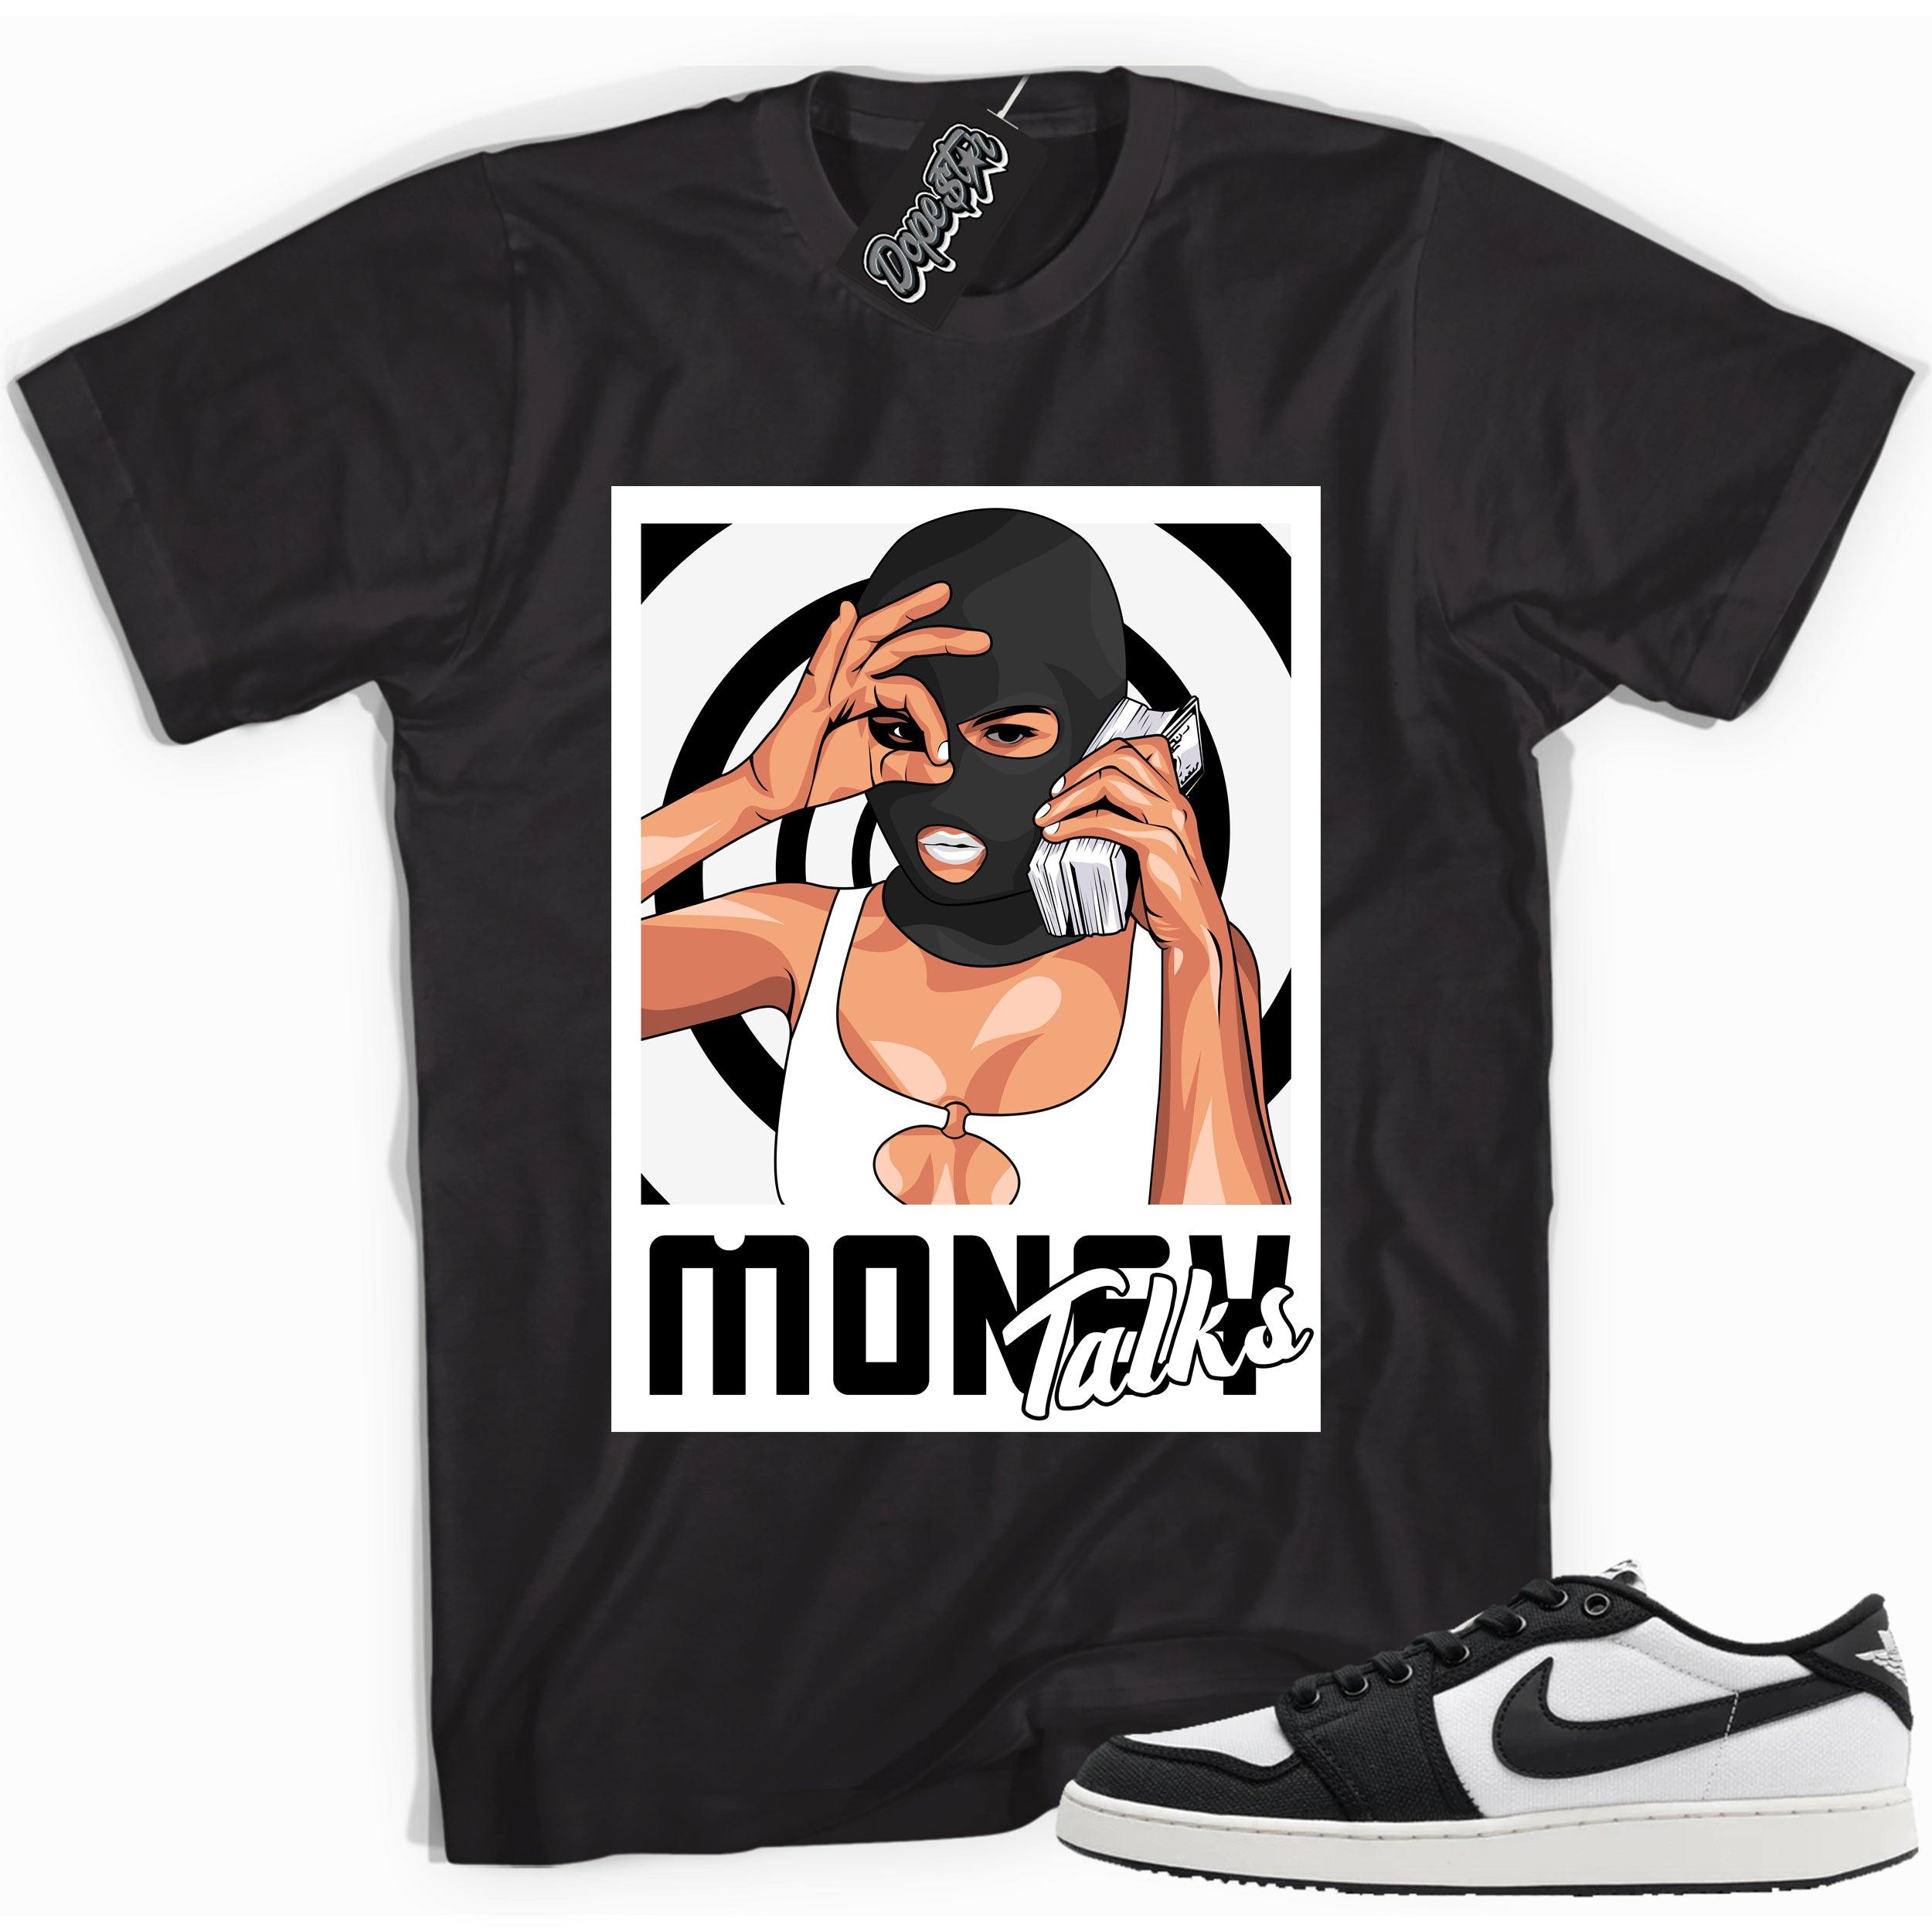 Cool black graphic tee with 'money talks' print, that perfectly matches Air Jordan 1 Retro Ajko Low Black & White sneakers.